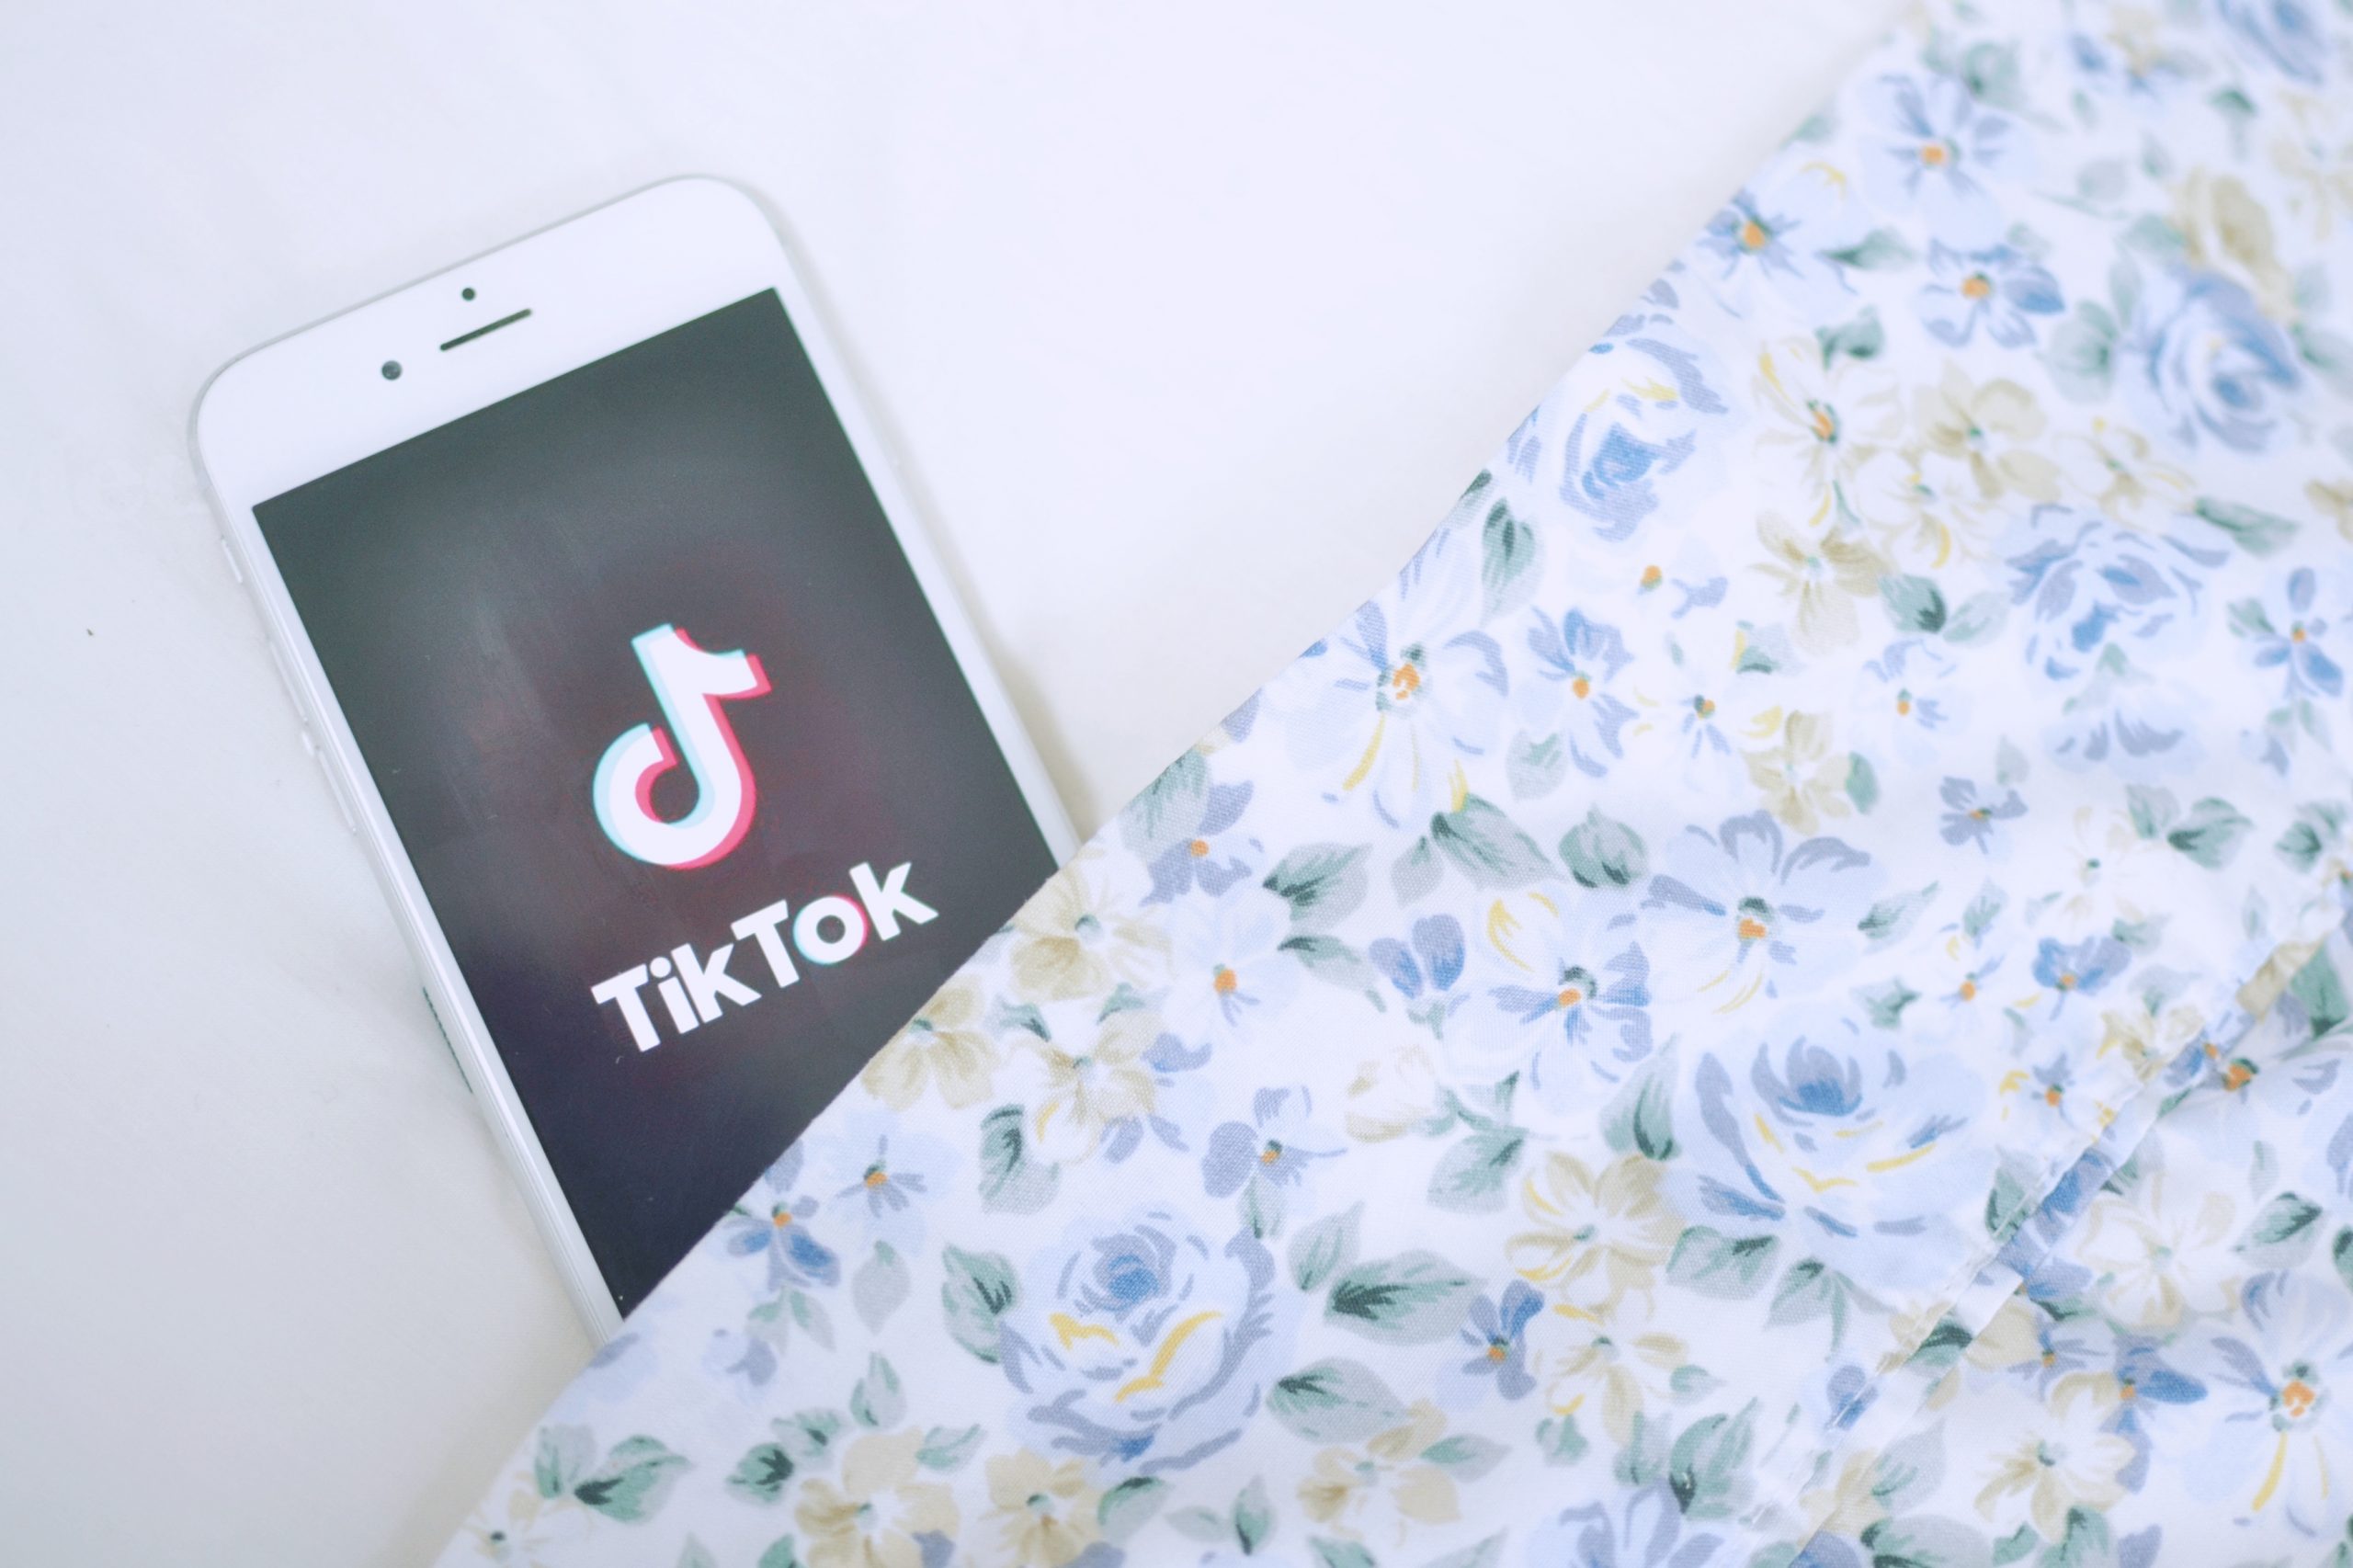 Floral Patter and phone displaying the app Tik Tok